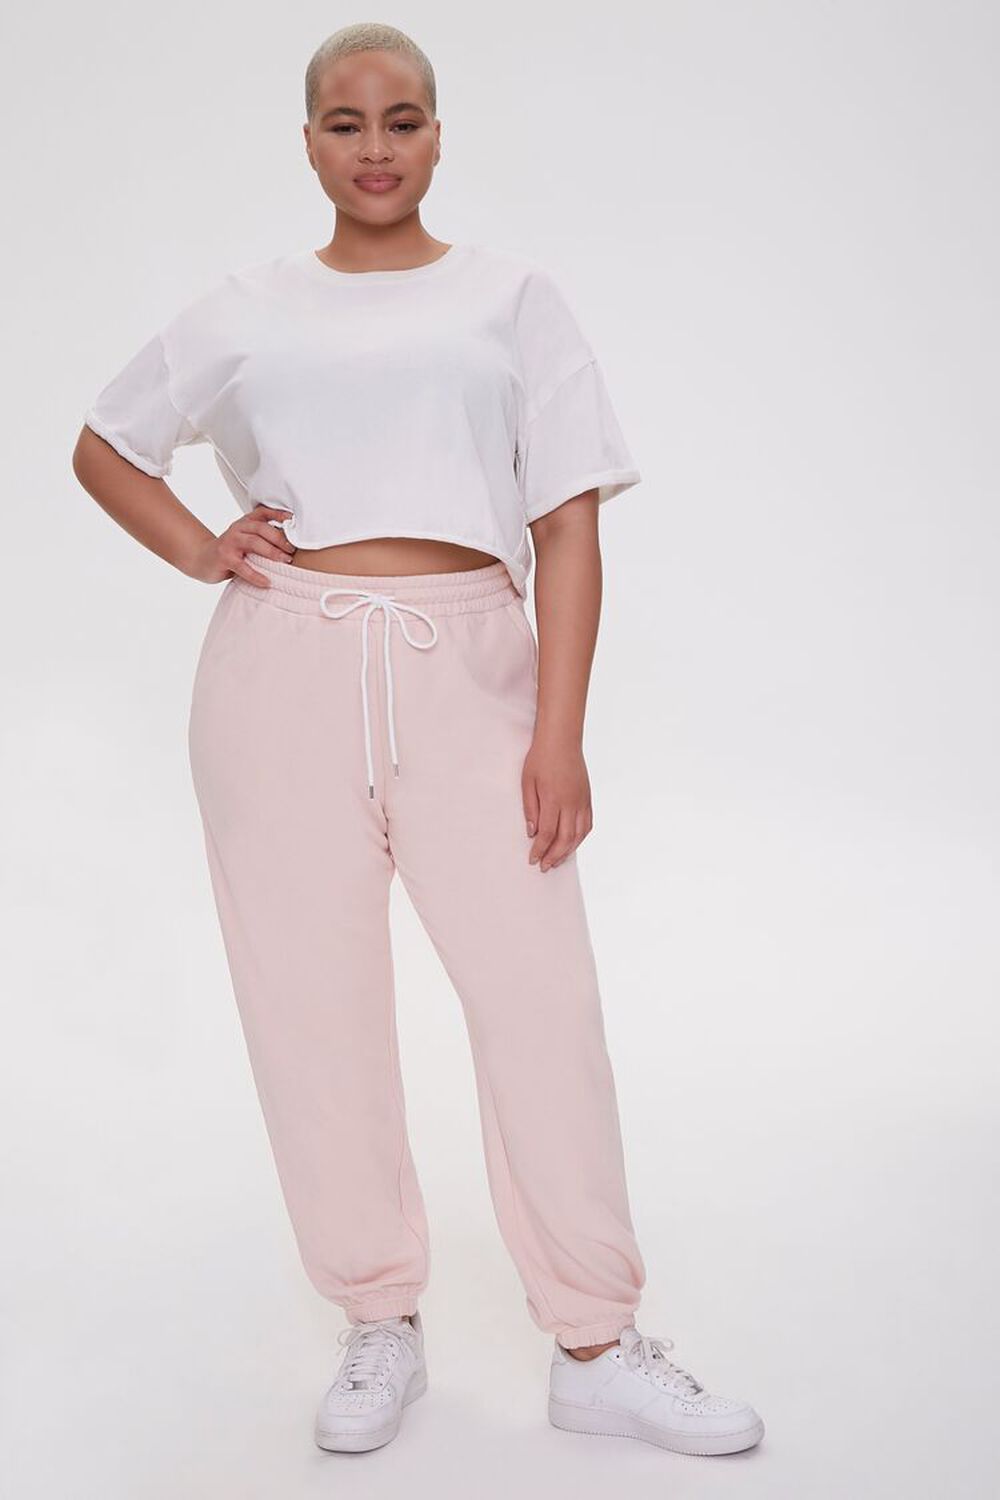 ROSE Plus Size French Terry Joggers, image 1